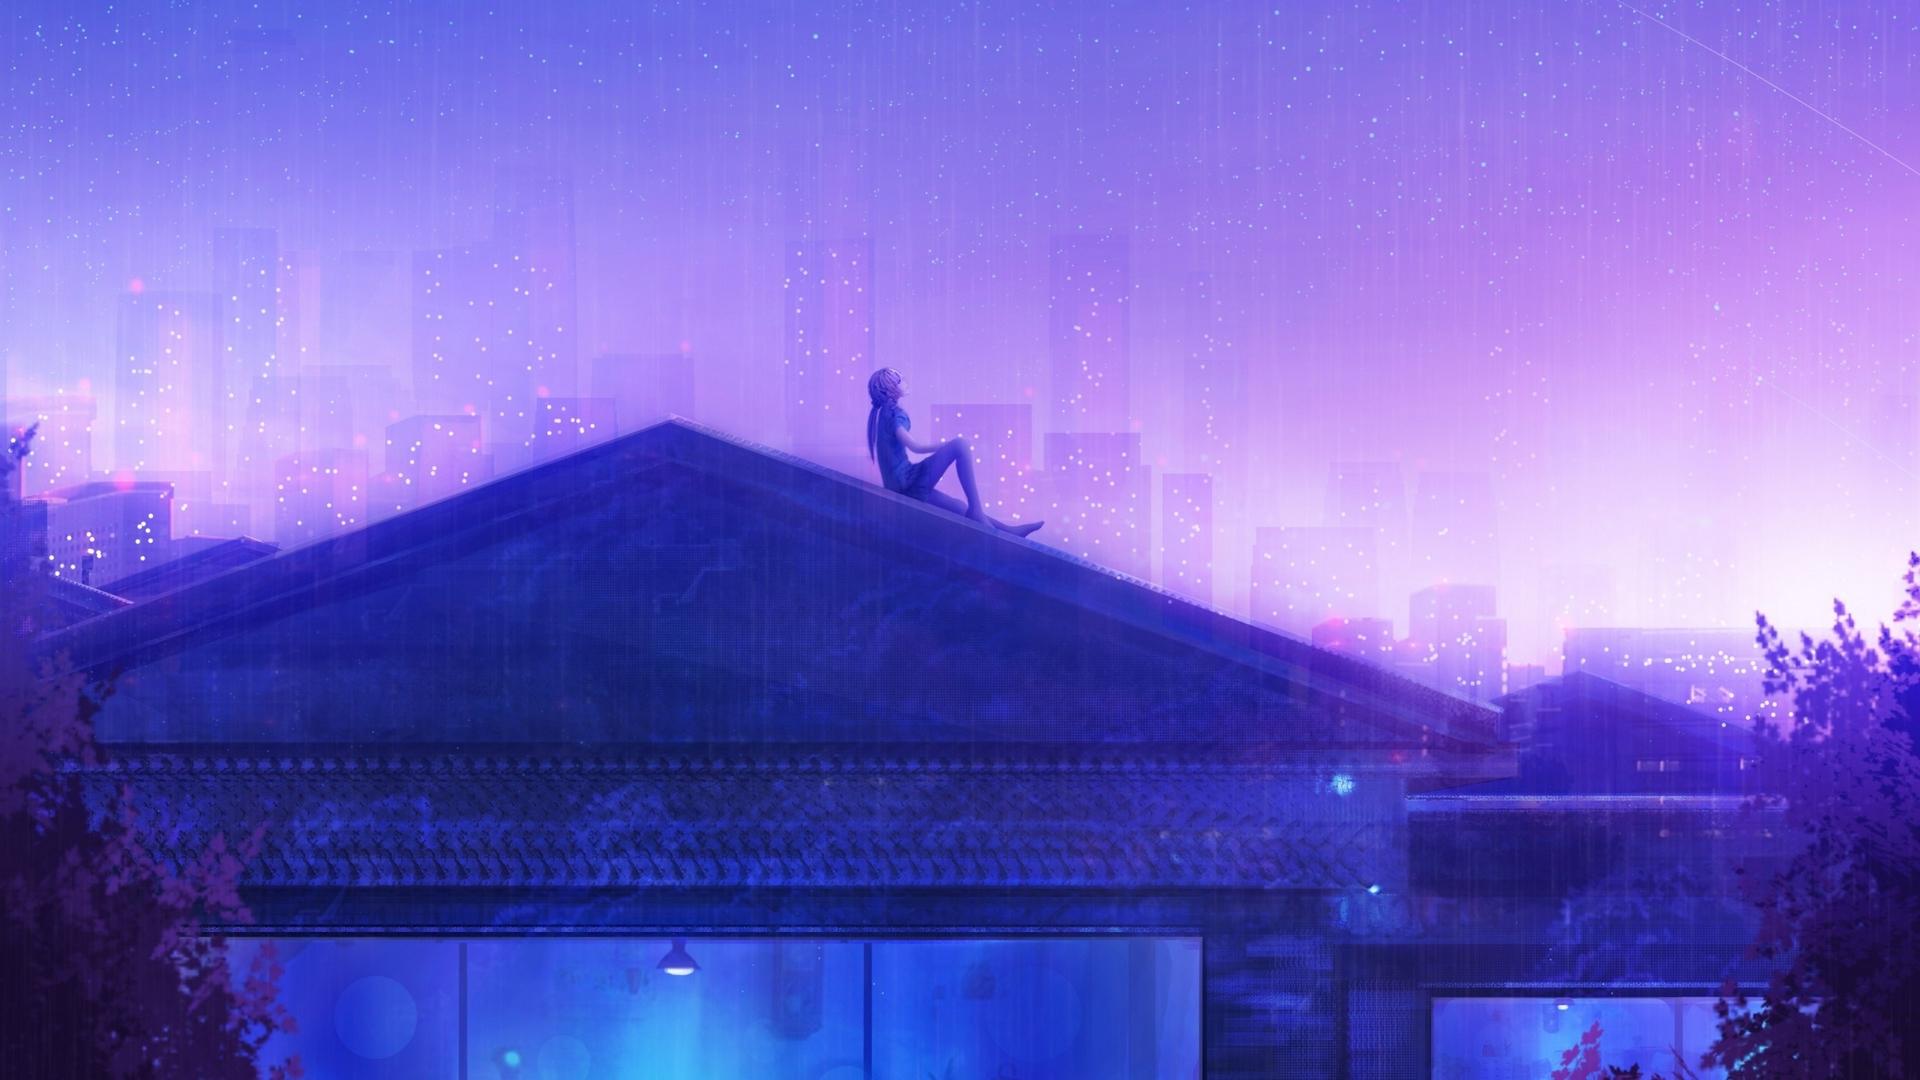 Anime Rooftop Wallpapers Top Free Anime Rooftop Backgrounds Wallpaperaccess 8398